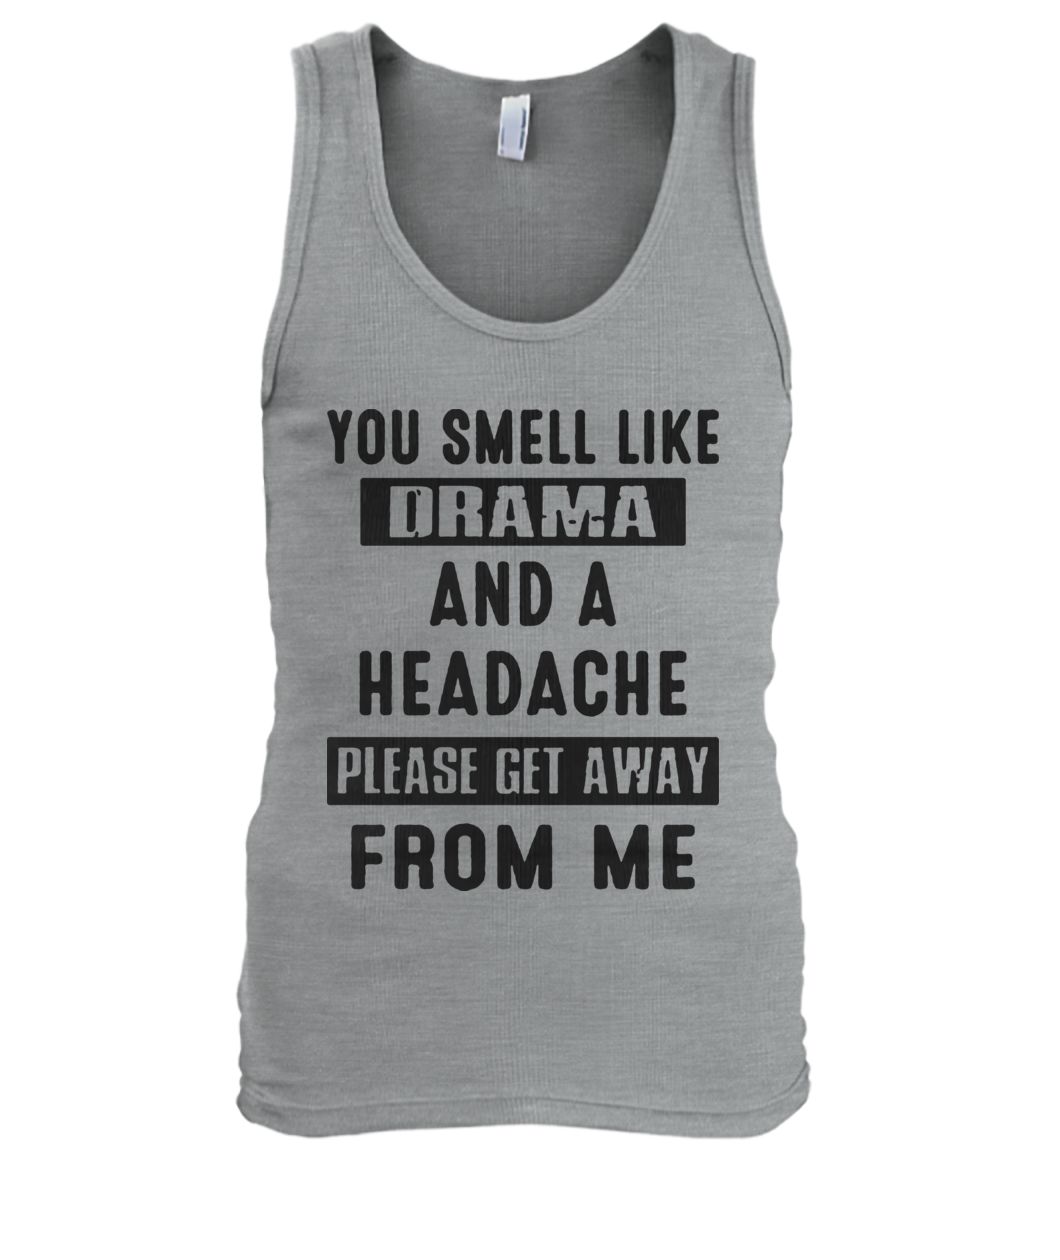 You smell like drama and a headache please get away from me men's tank top